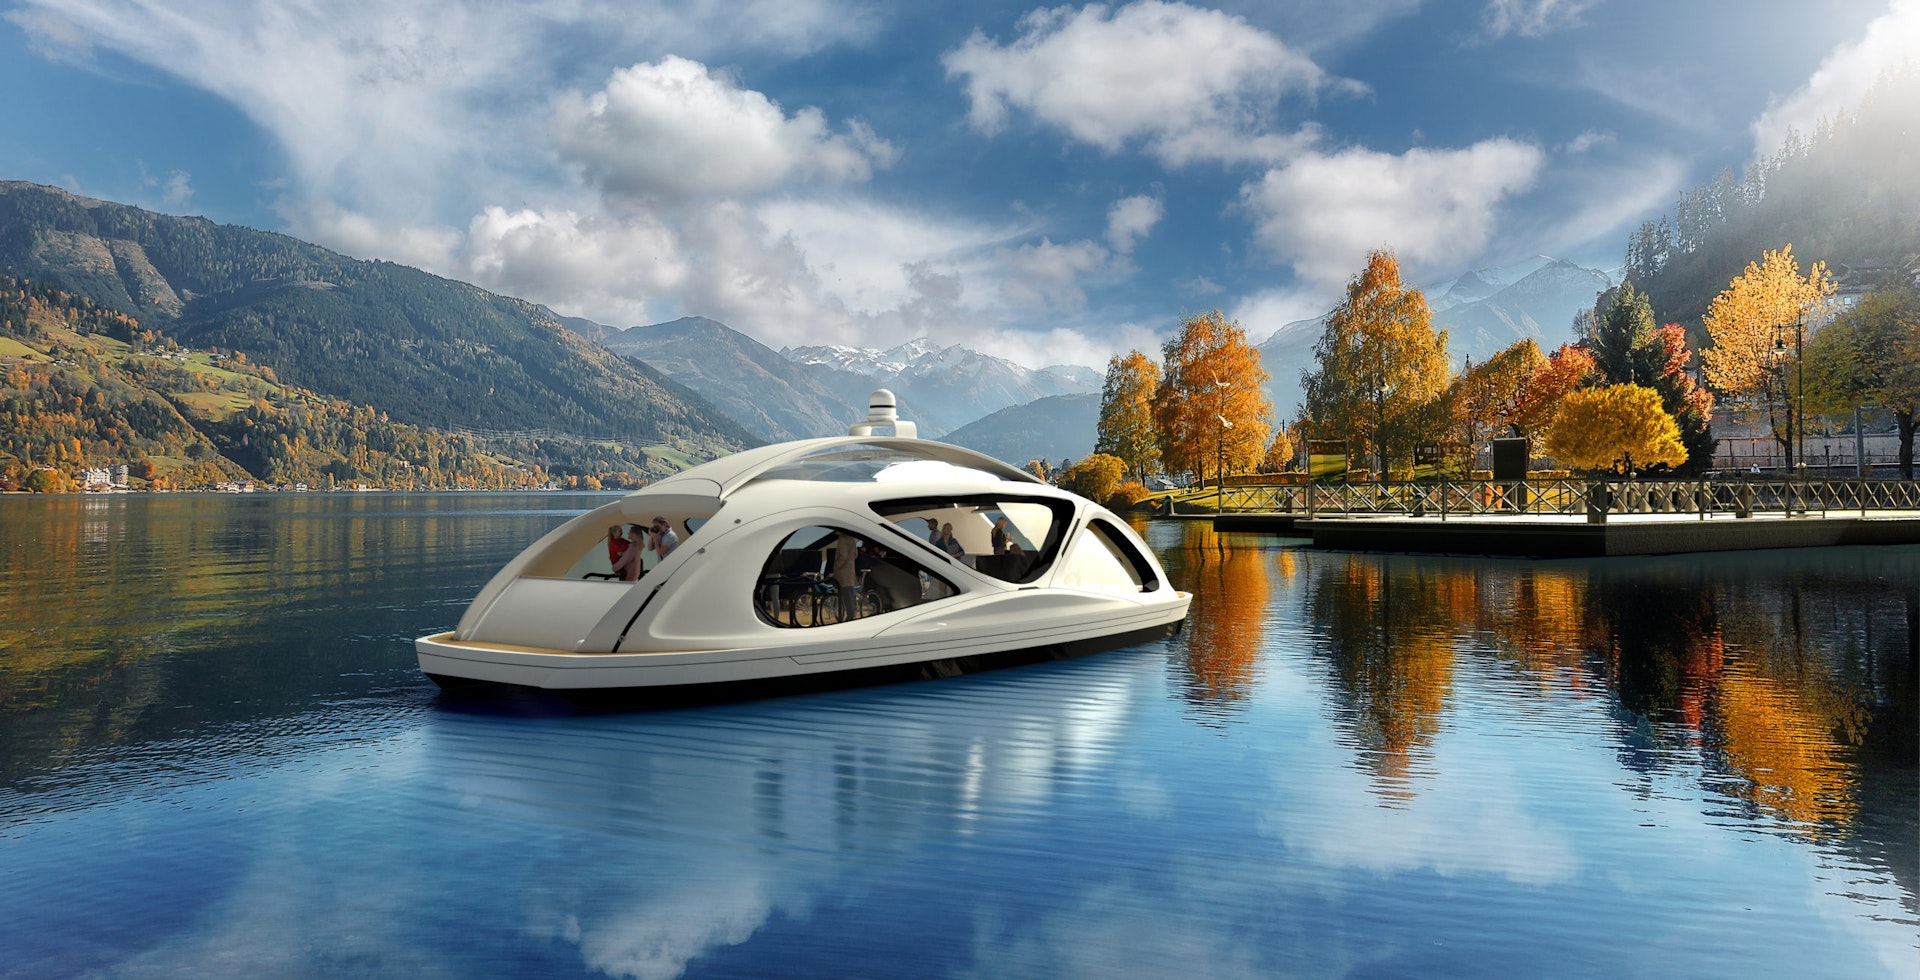 Rendering of water taxi in nature